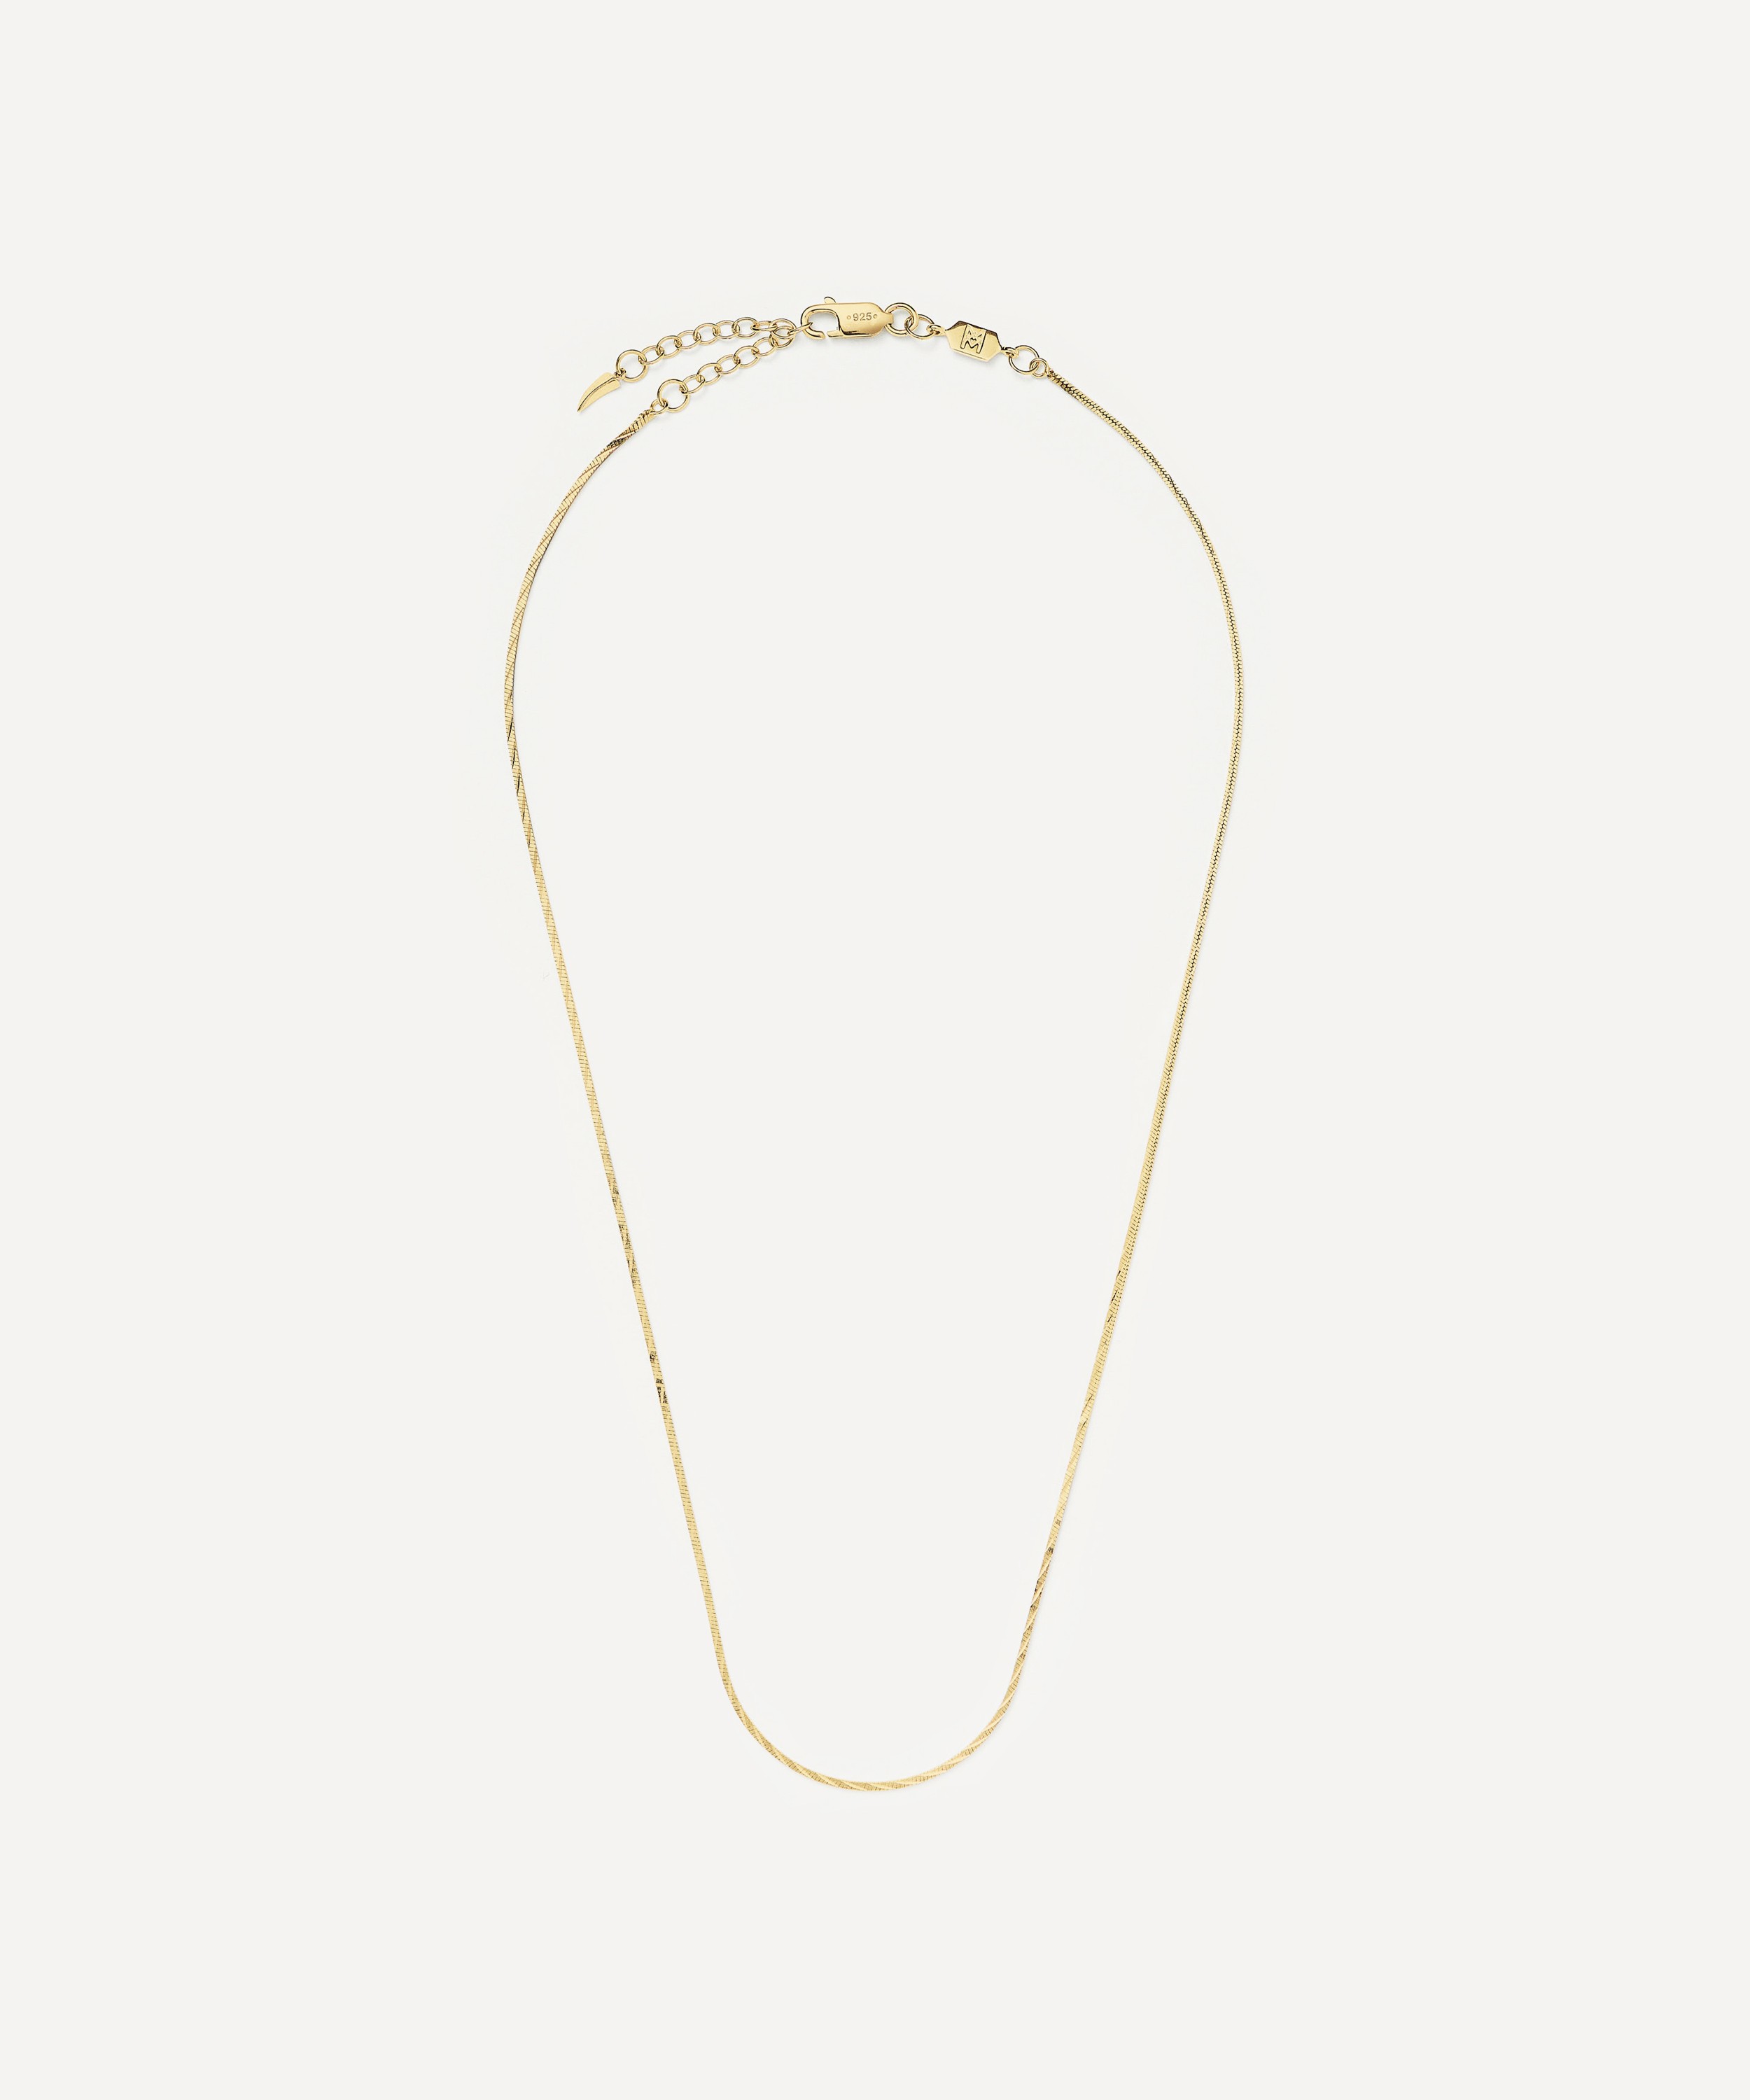 Snake Chain Necklace: Gold - SFMOMA Museum Store